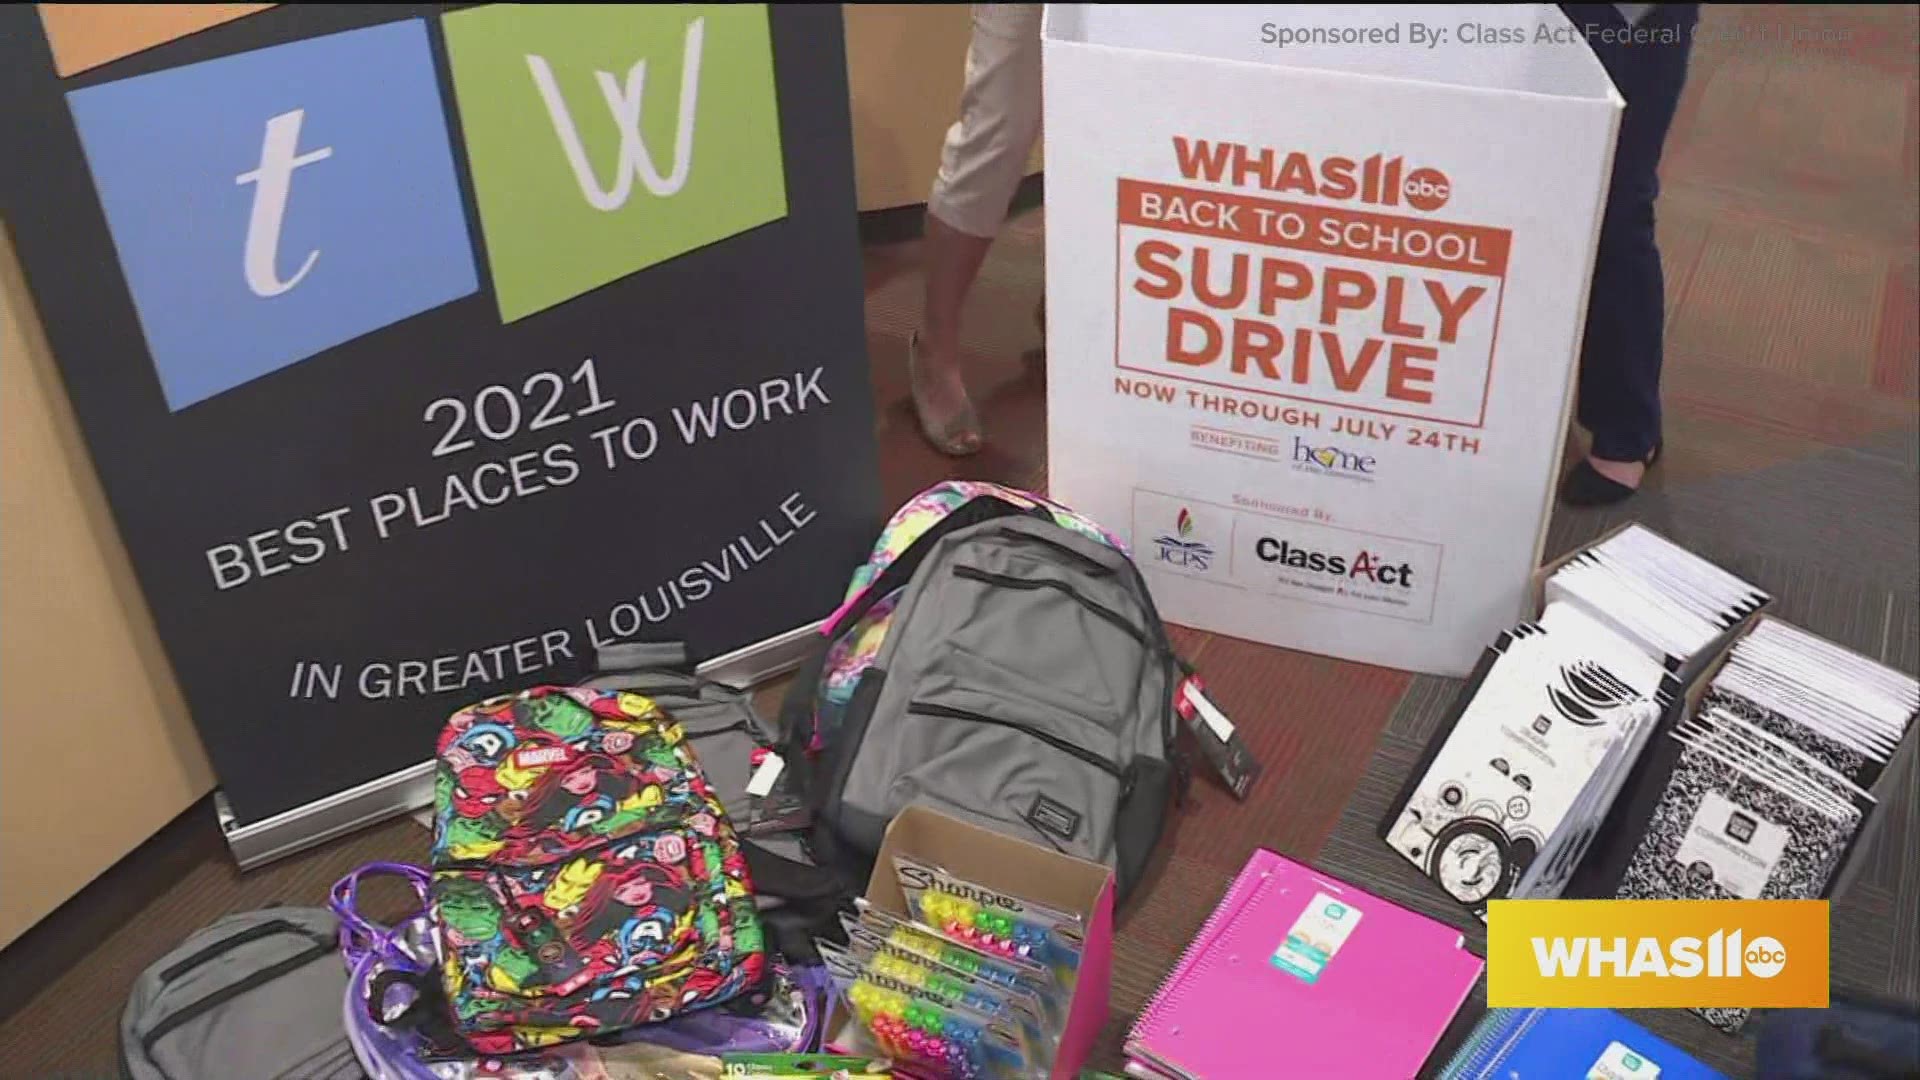 Class Act Federal Credit Union is accepting back to school supplies through July 24th, 2021. To make a monetary donation, text “SUPPLIES” to 502-582-7290.